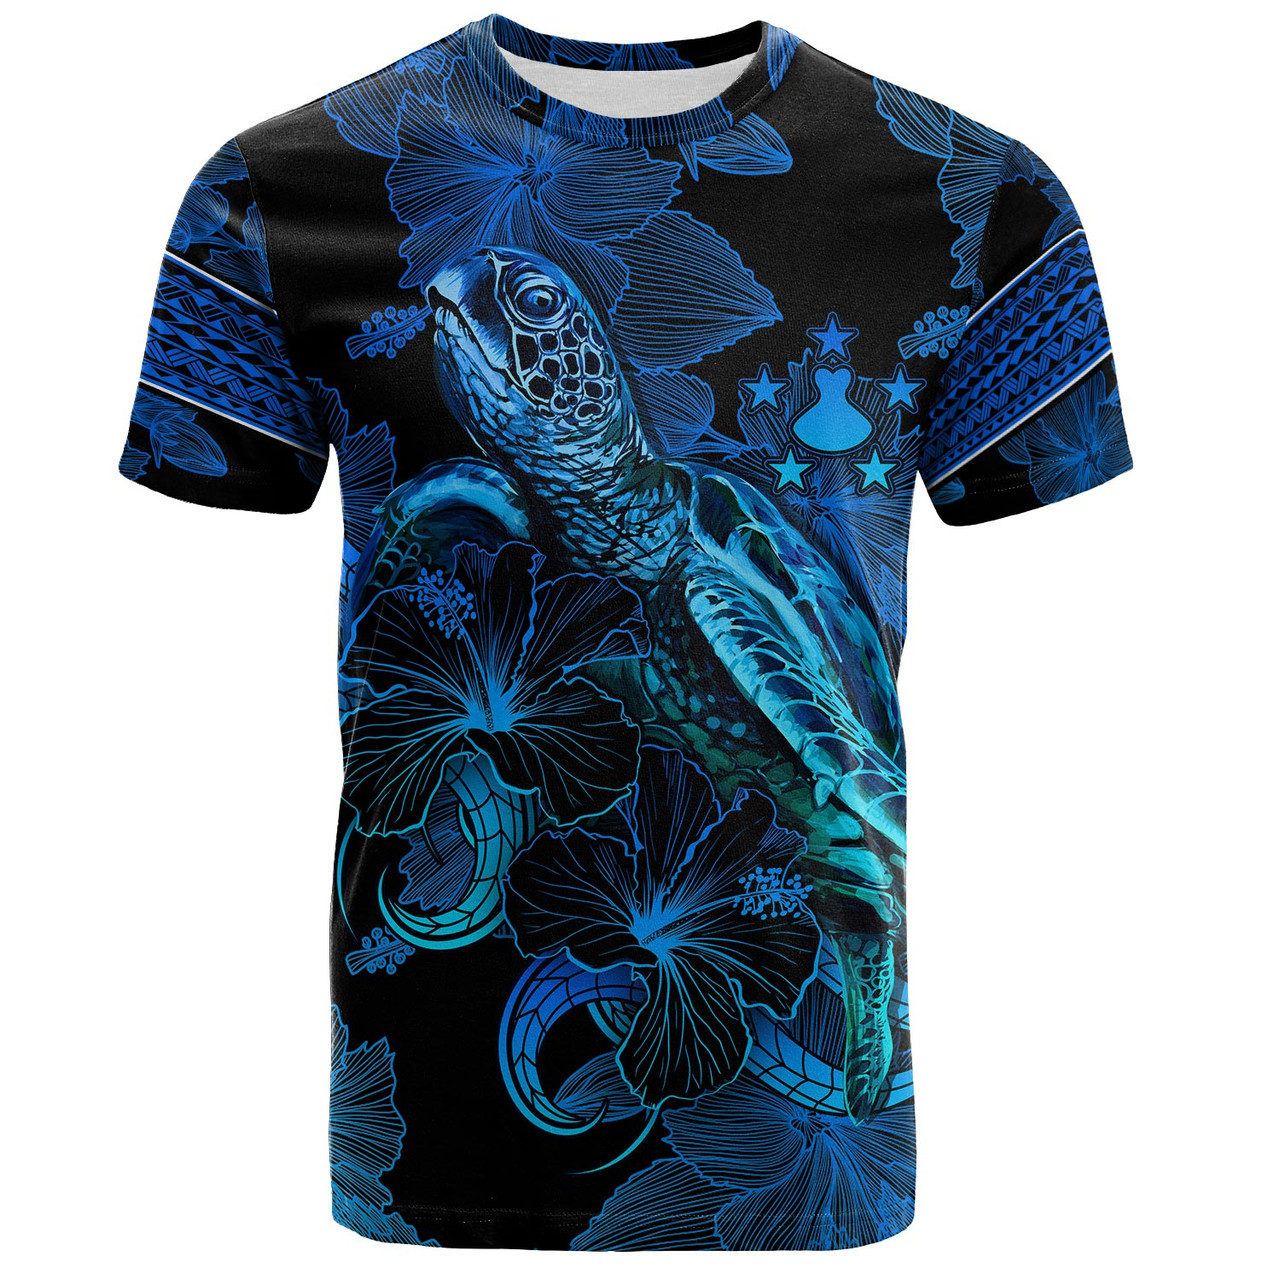 Austral Islands T-Shirt Sea Turtle With Blooming Hibiscus Flowers Tribal Blue